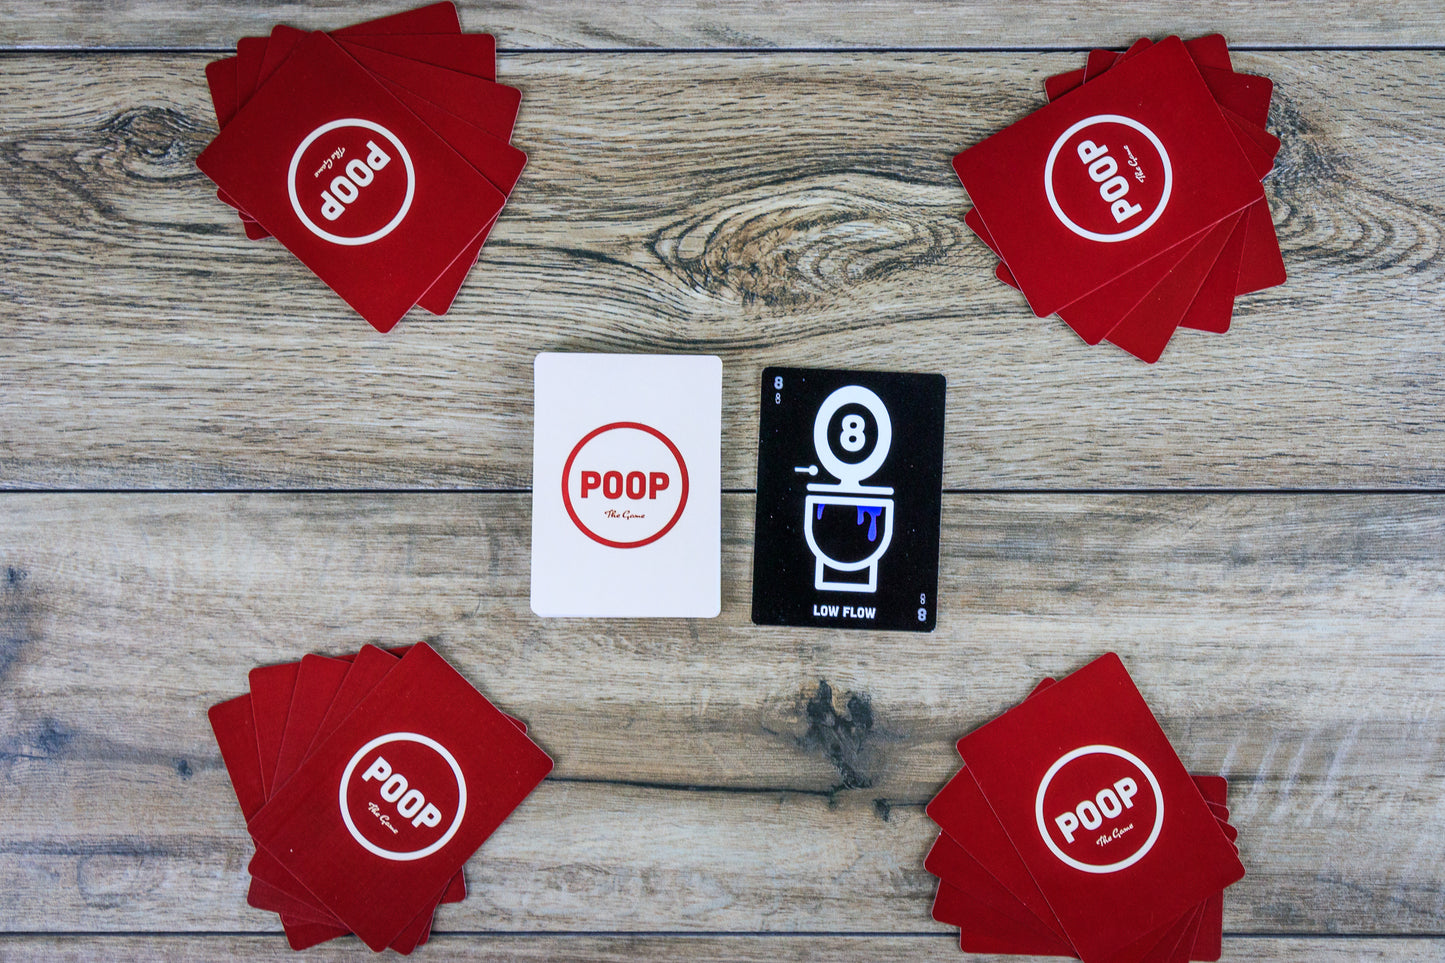 Poop: Brown Bag Combo | Family Friendly Card Game | 2-10 Players Game Breaking Games